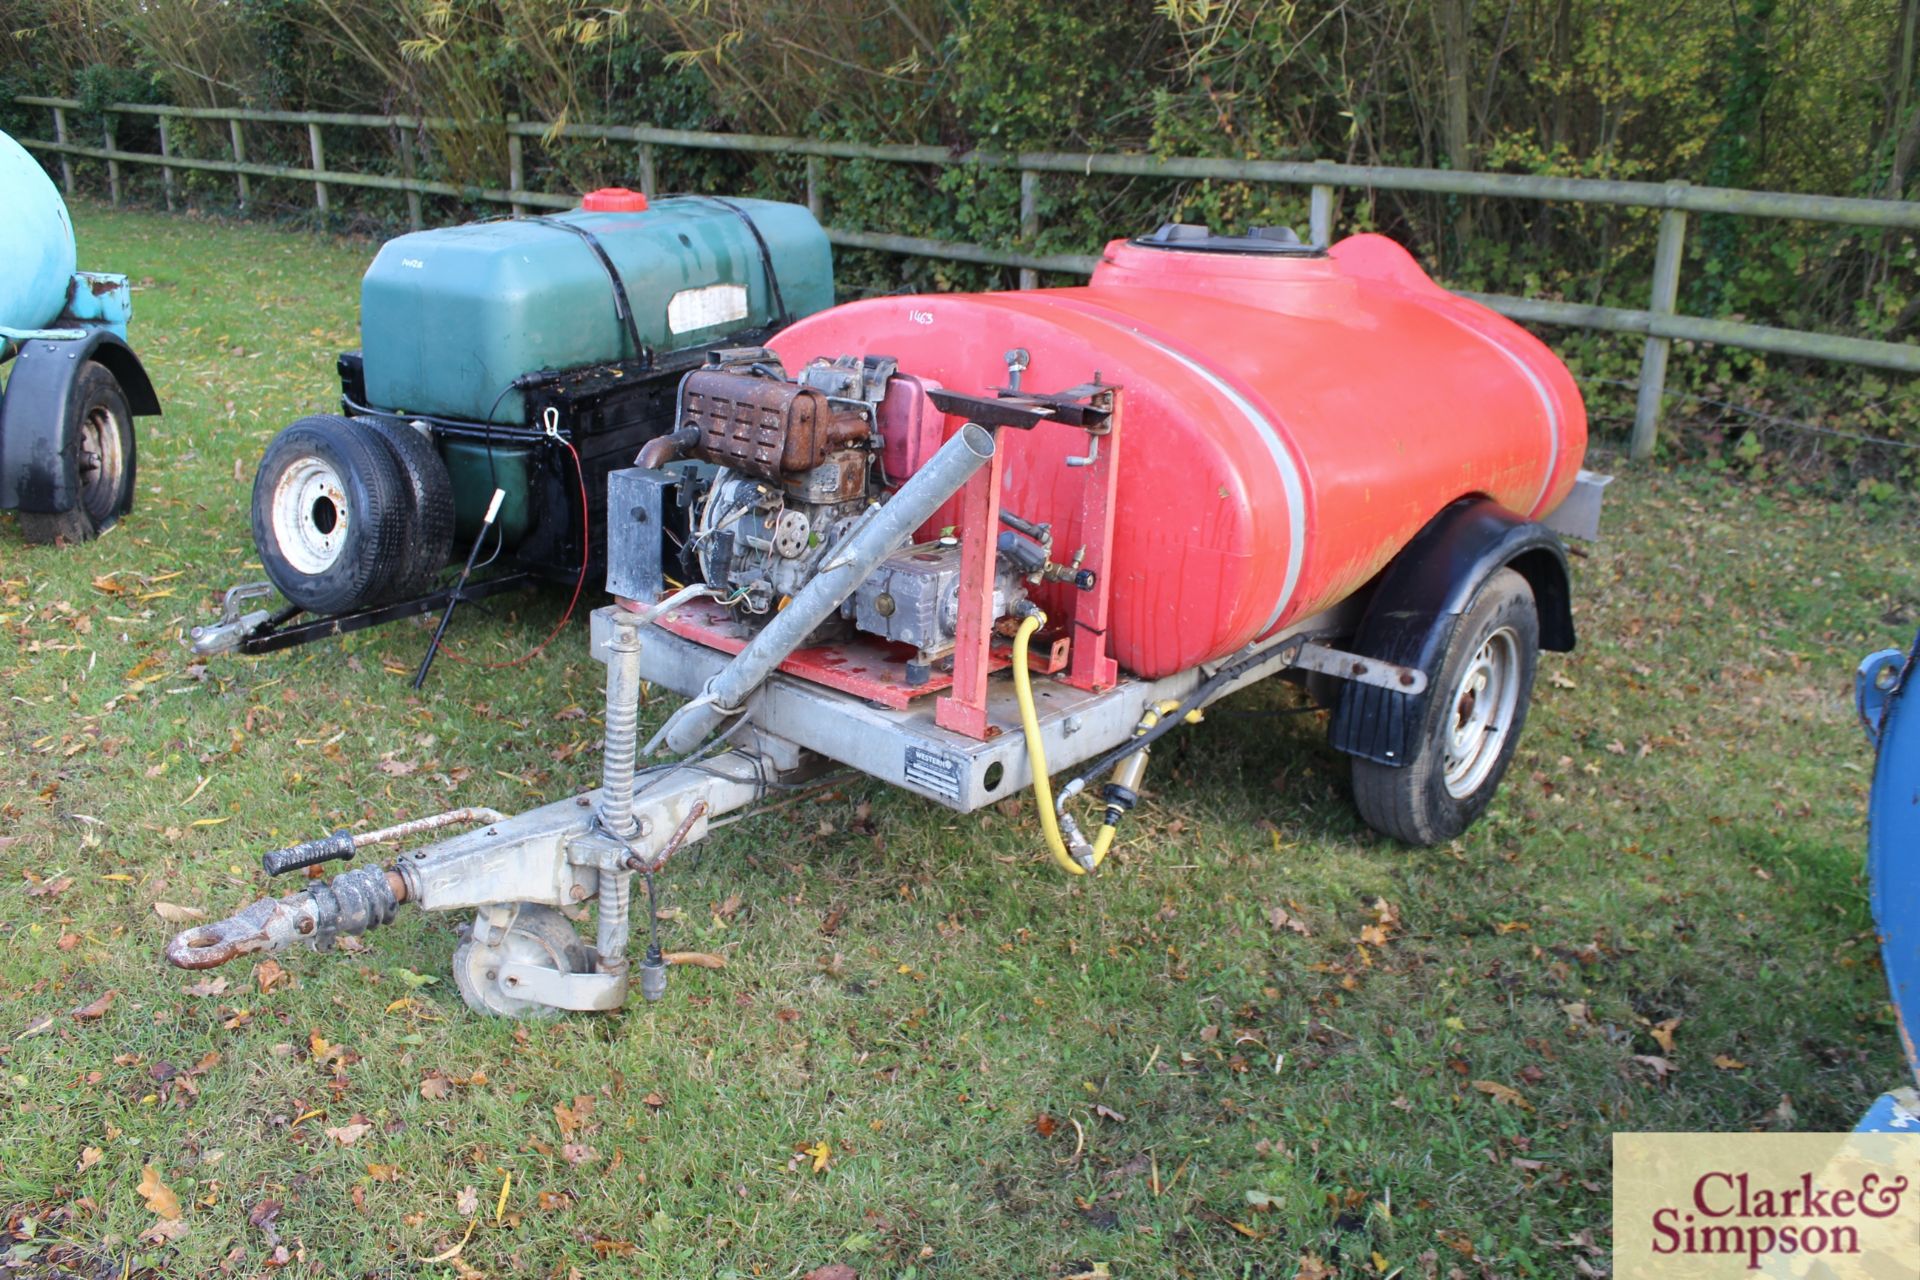 Western fast tow single axle water bowser. With electric start diesel engine and pump. - Image 2 of 10